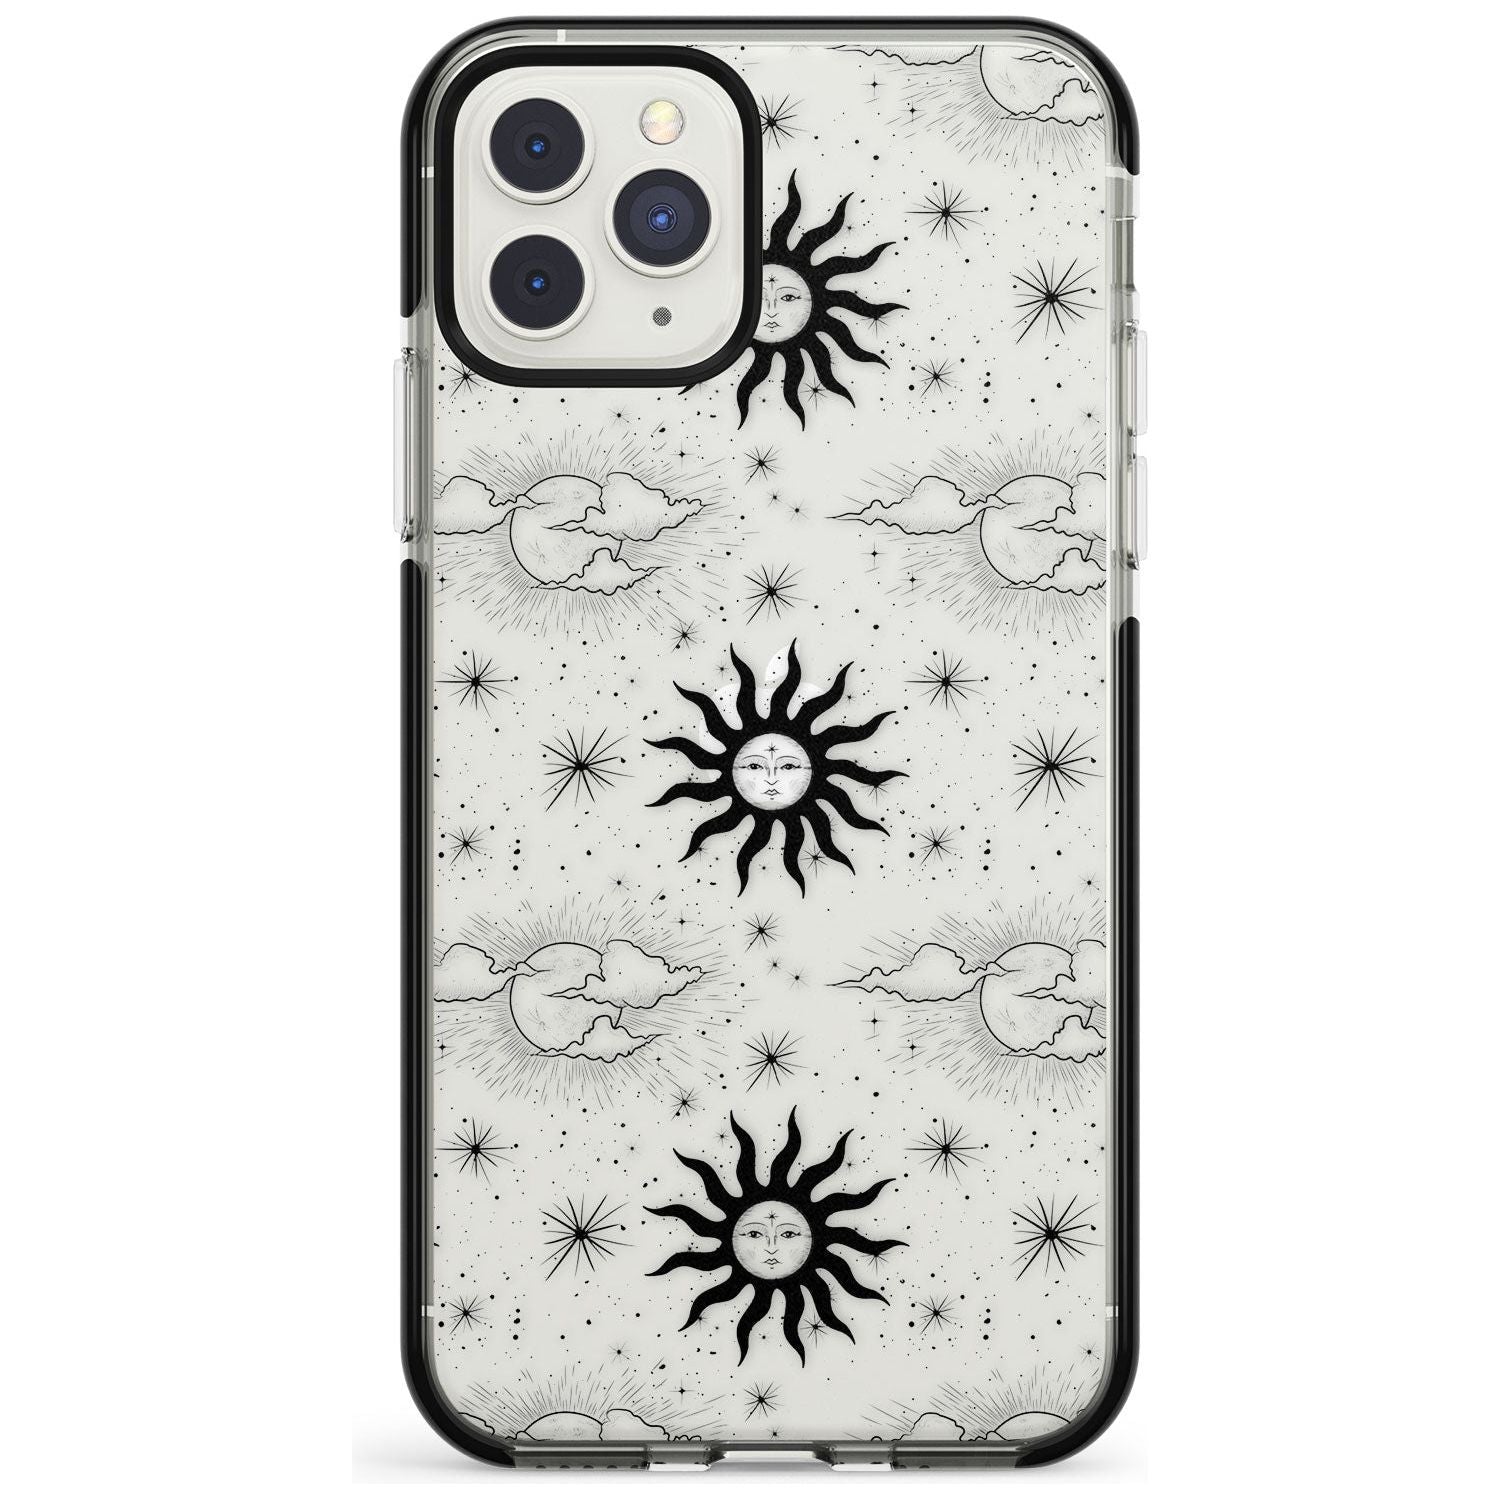 Suns & Clouds Vintage Astrological Black Impact Phone Case for iPhone 11 Pro Max